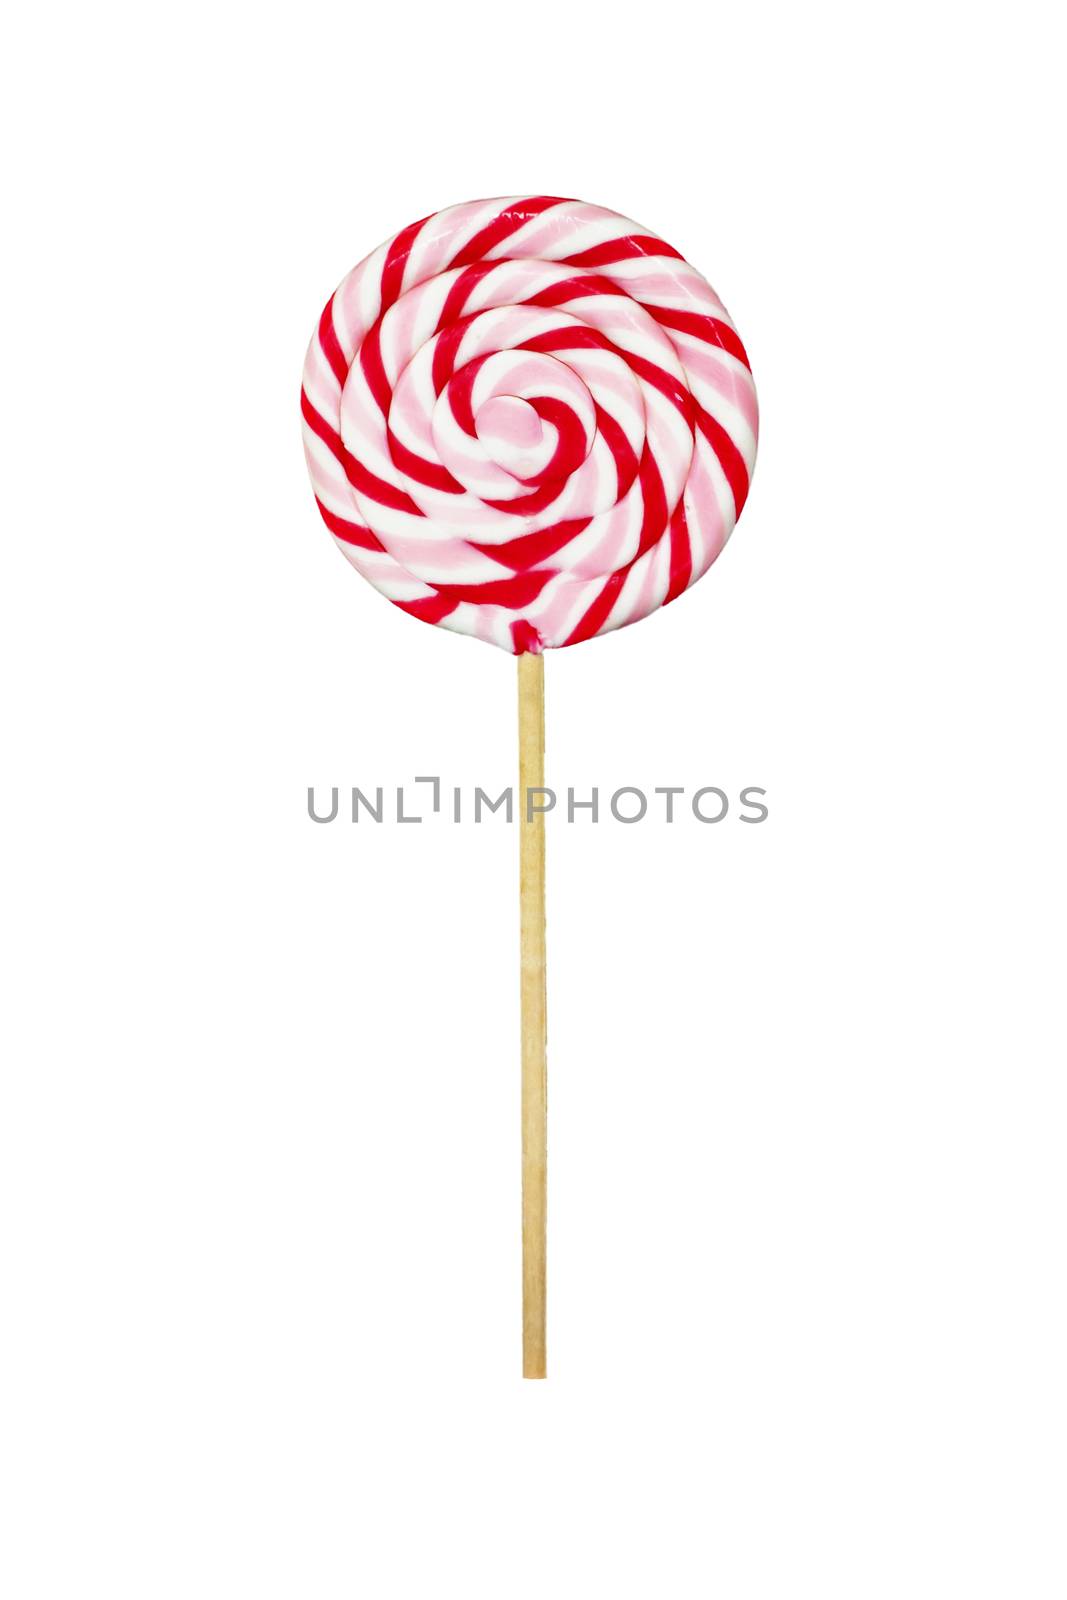 Colorful lolipop isolated on plain white background by asafaric